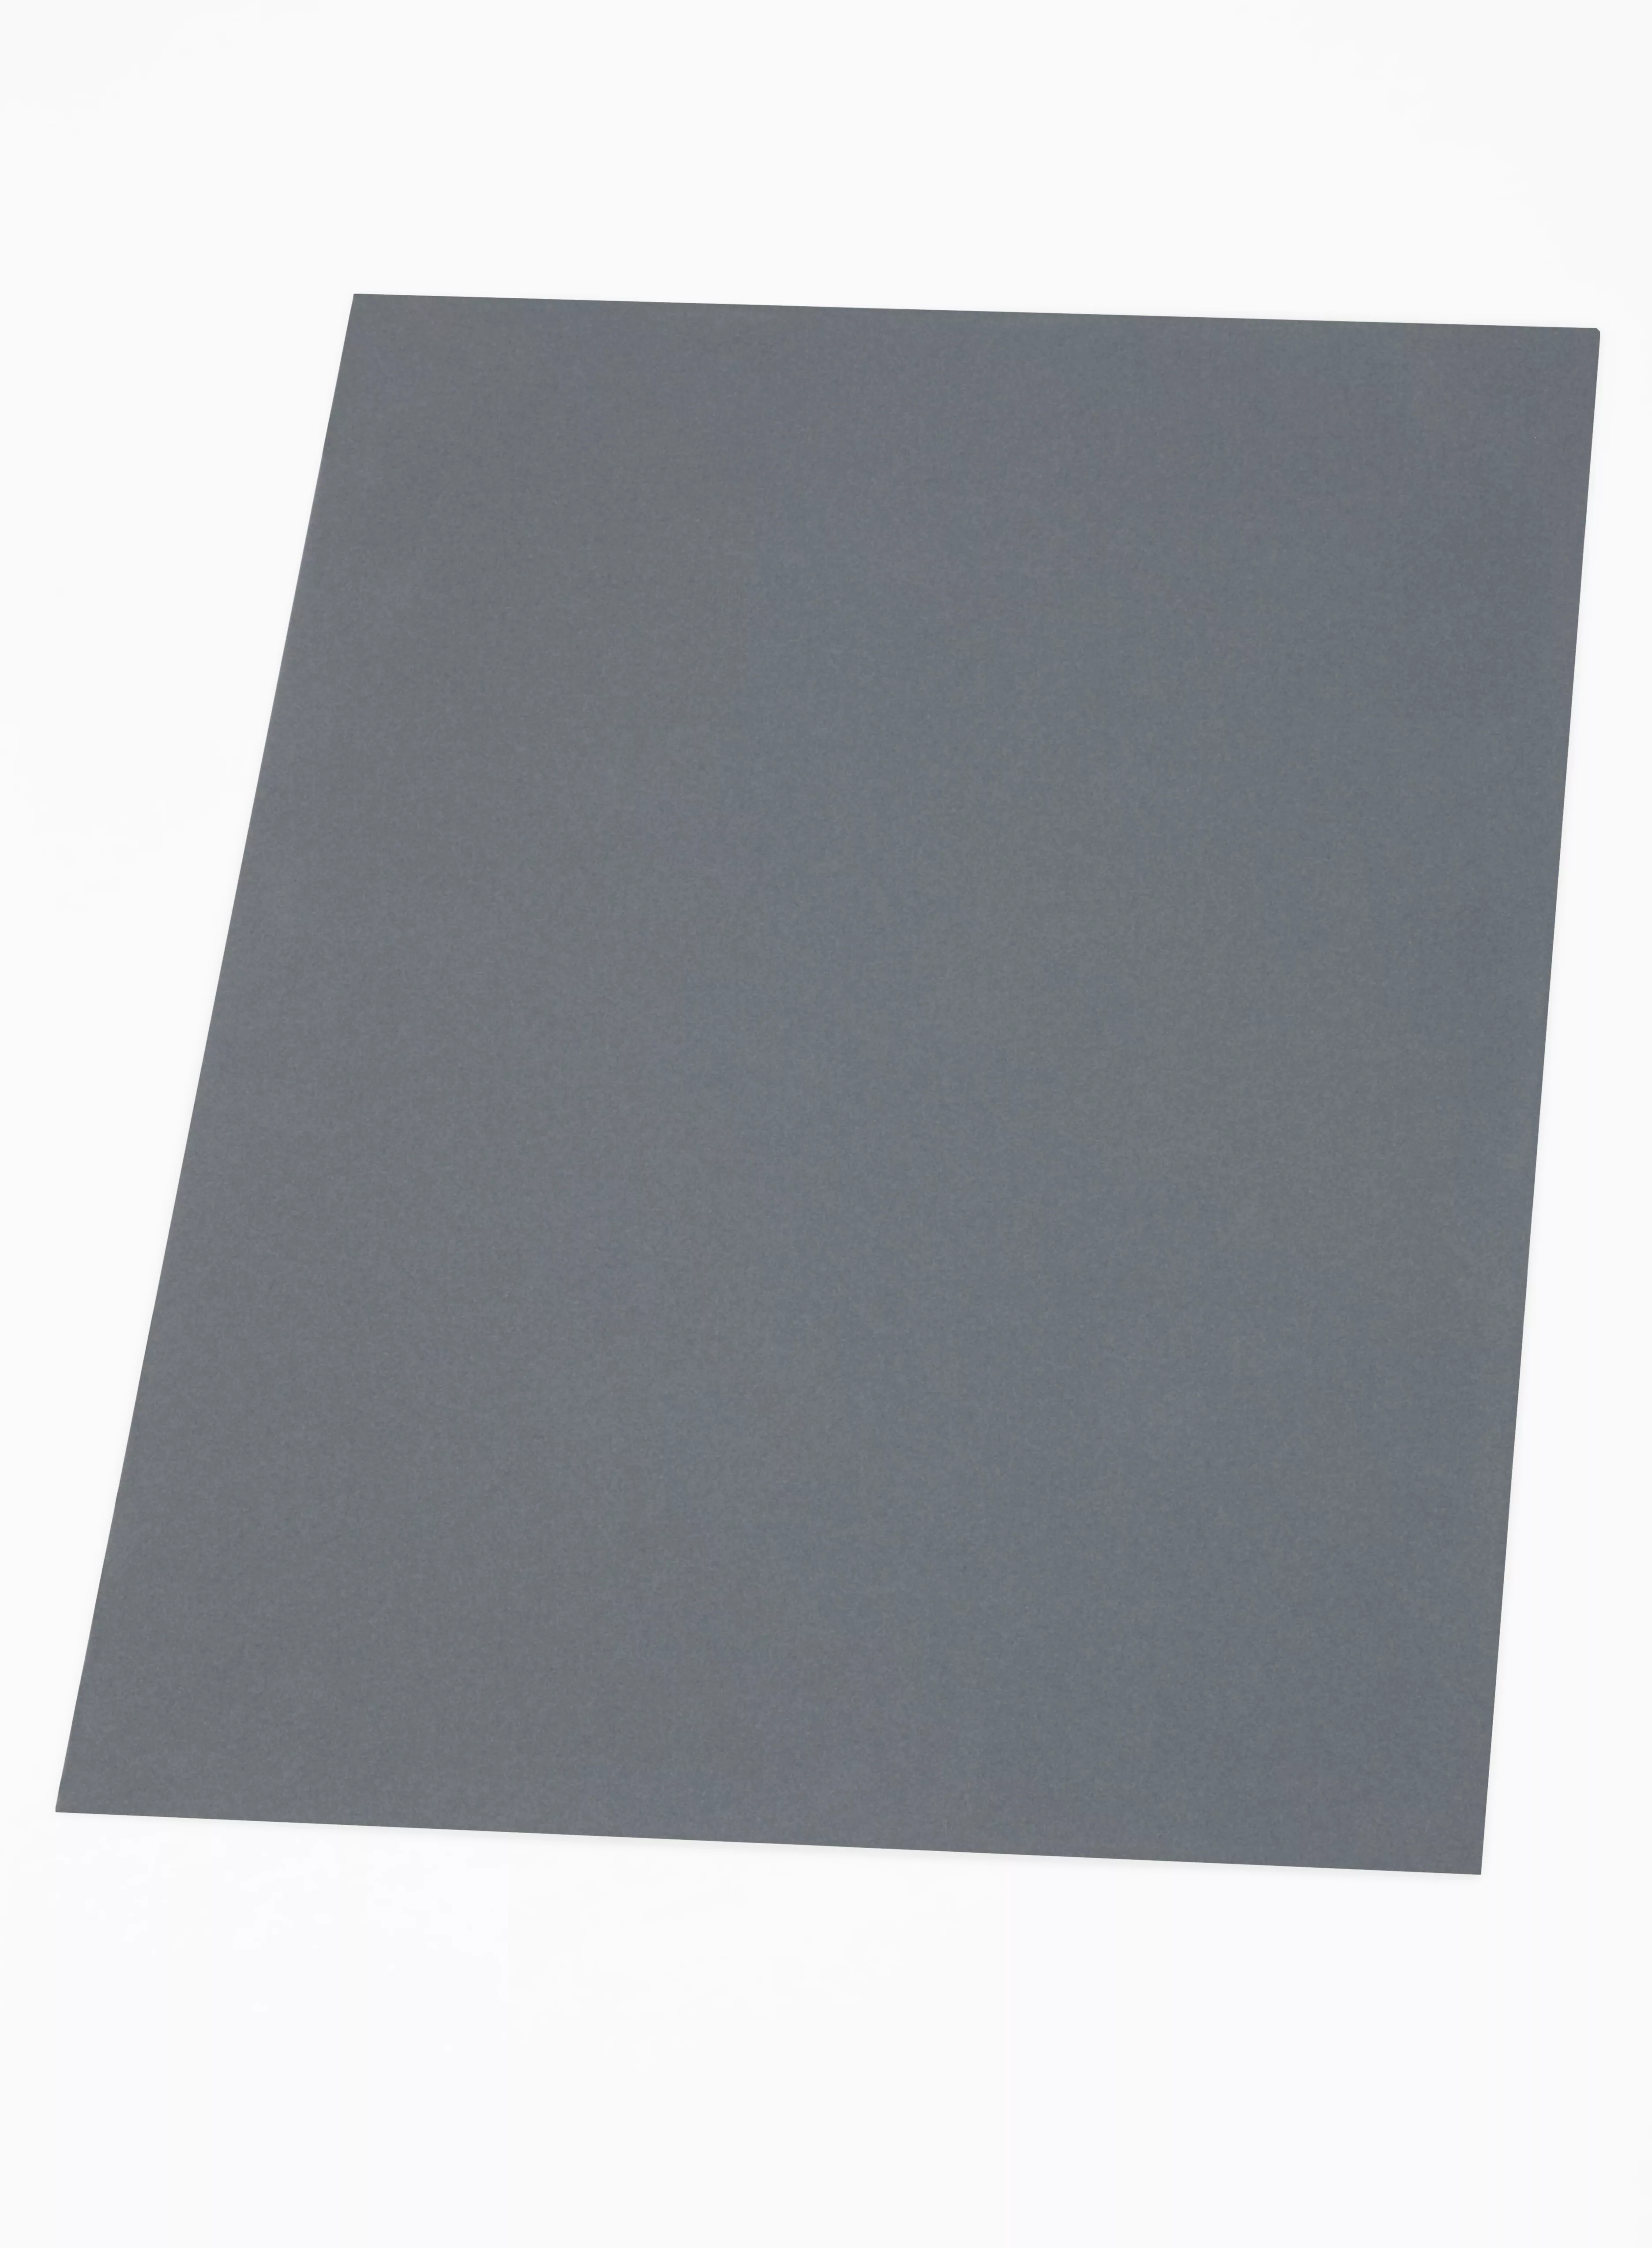 3M™ Thermally Conductive Interface Pad Sheet 5516S, 320 mm x 230 mm 1.0
mm, 40/Case